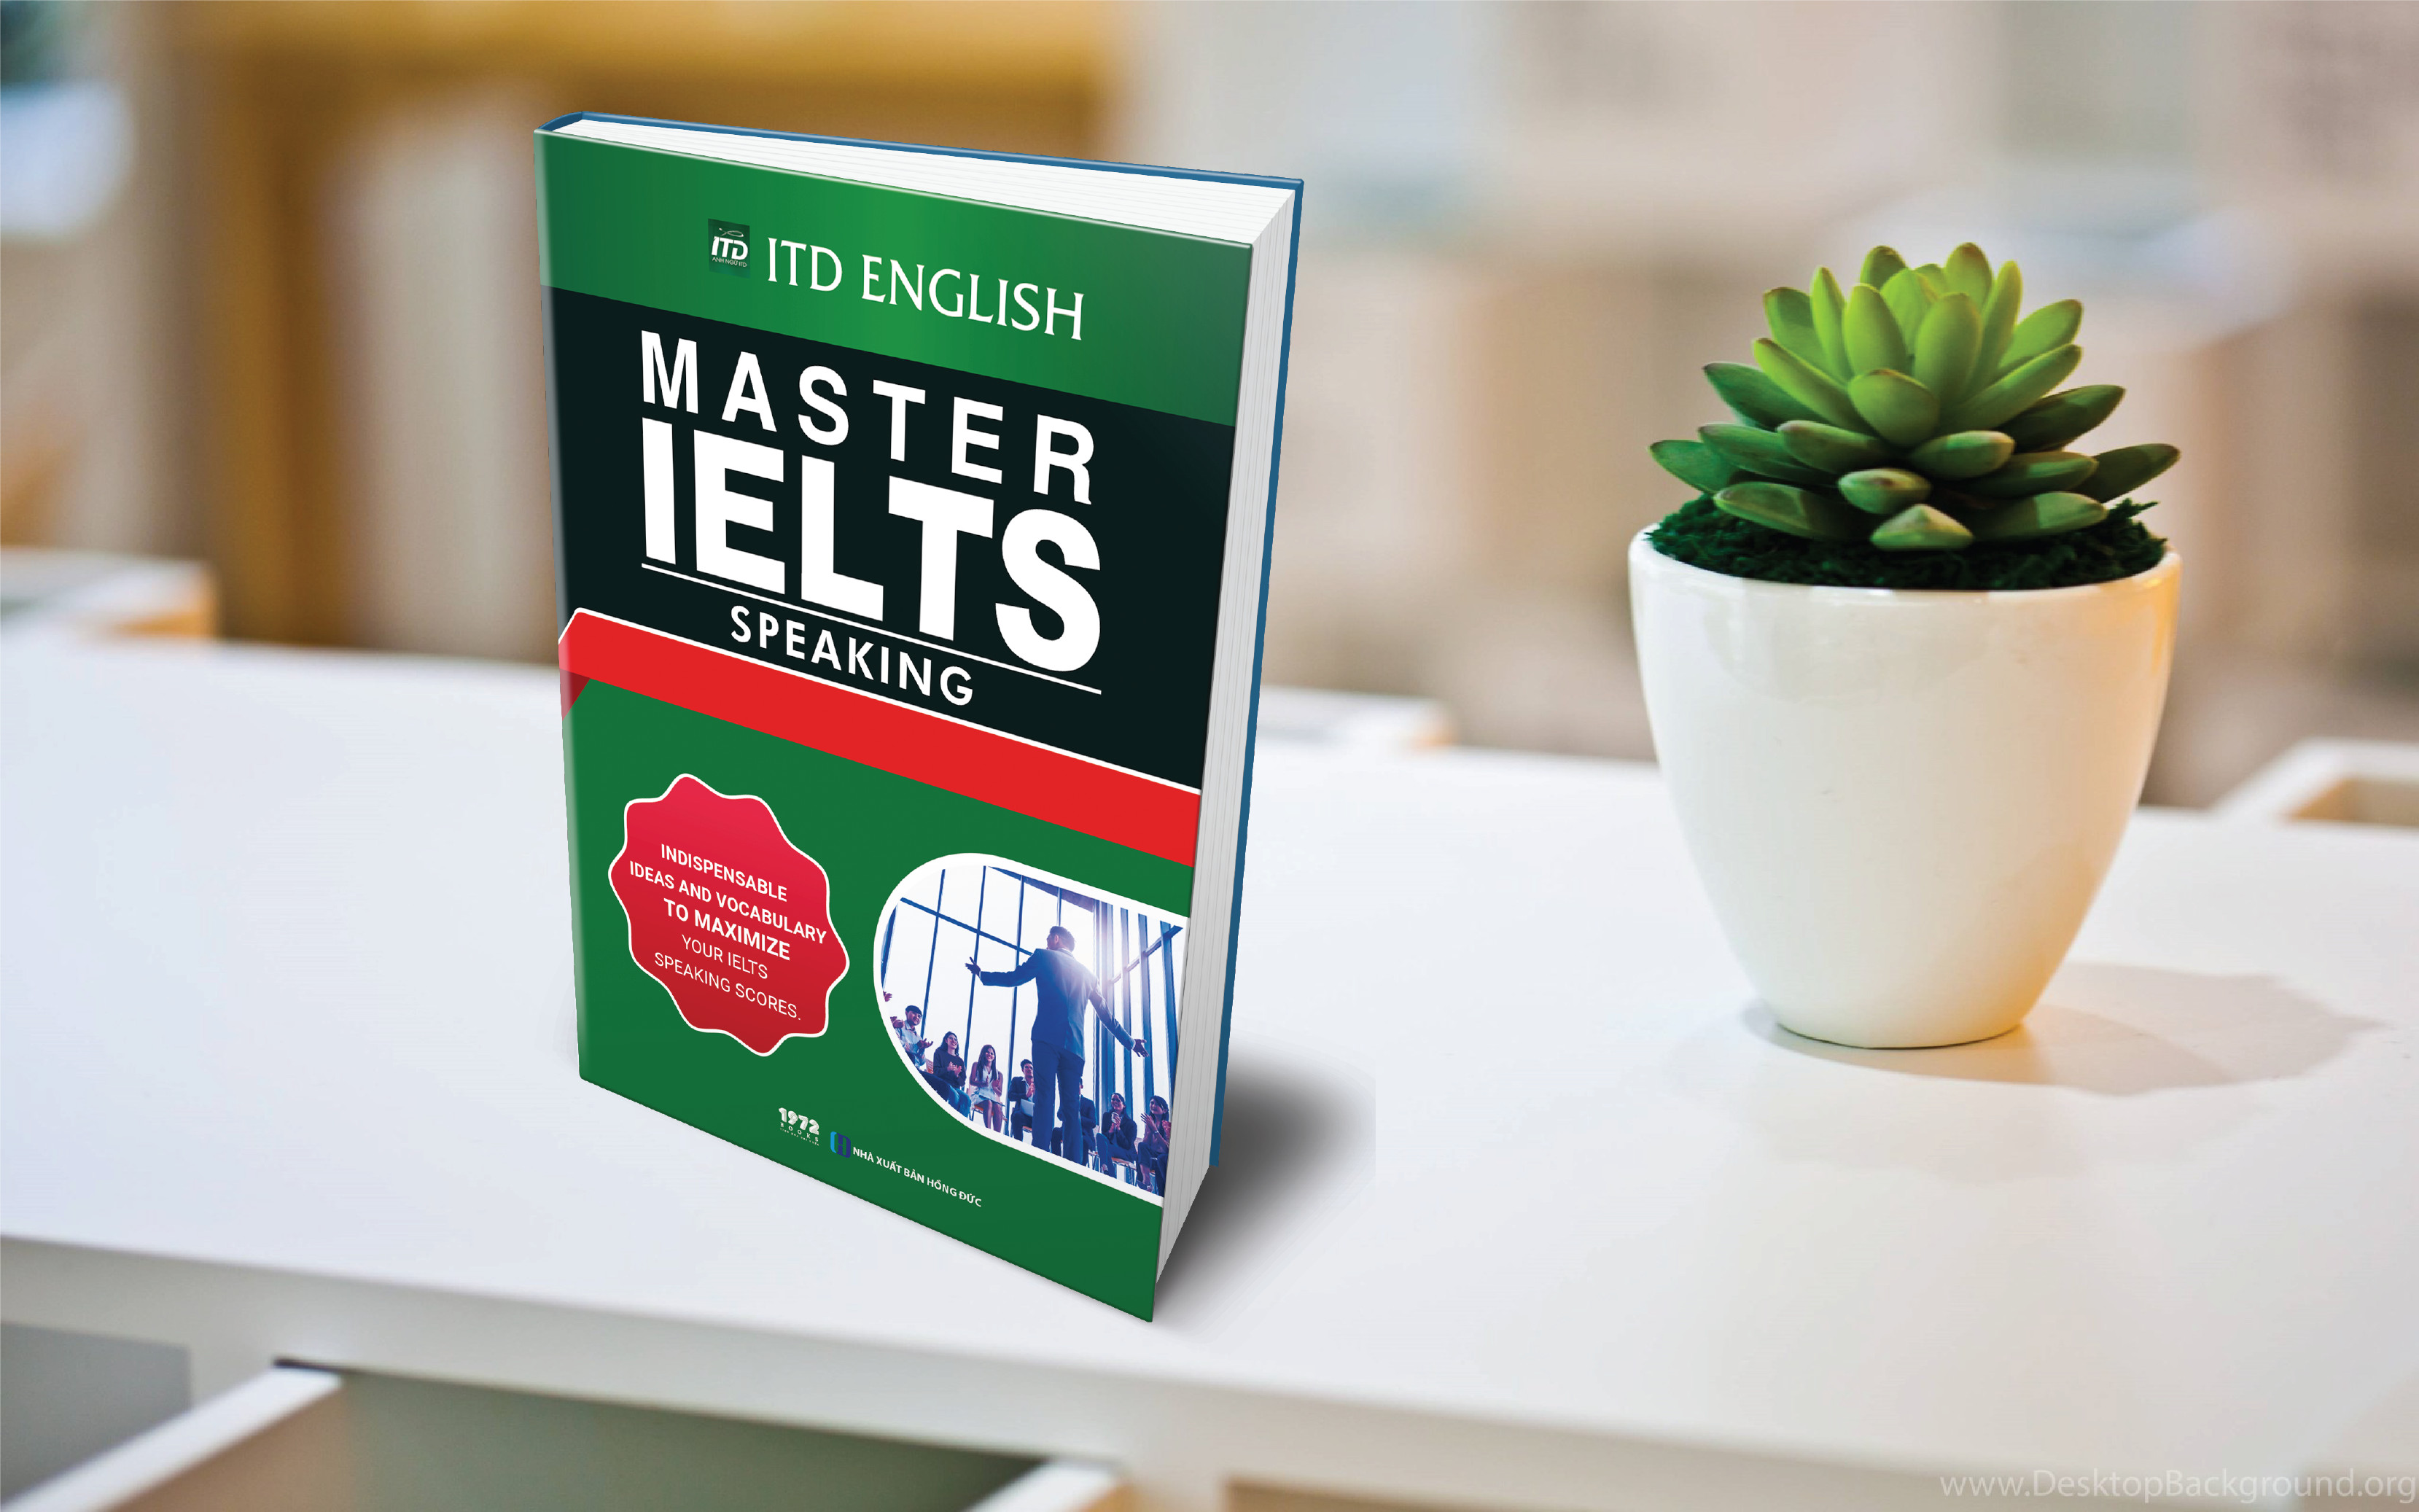 MASTER IELTS: SPEAKING - Indispensable Ideas And Vocabulary To Maximize Your Ielts Speaking Scores